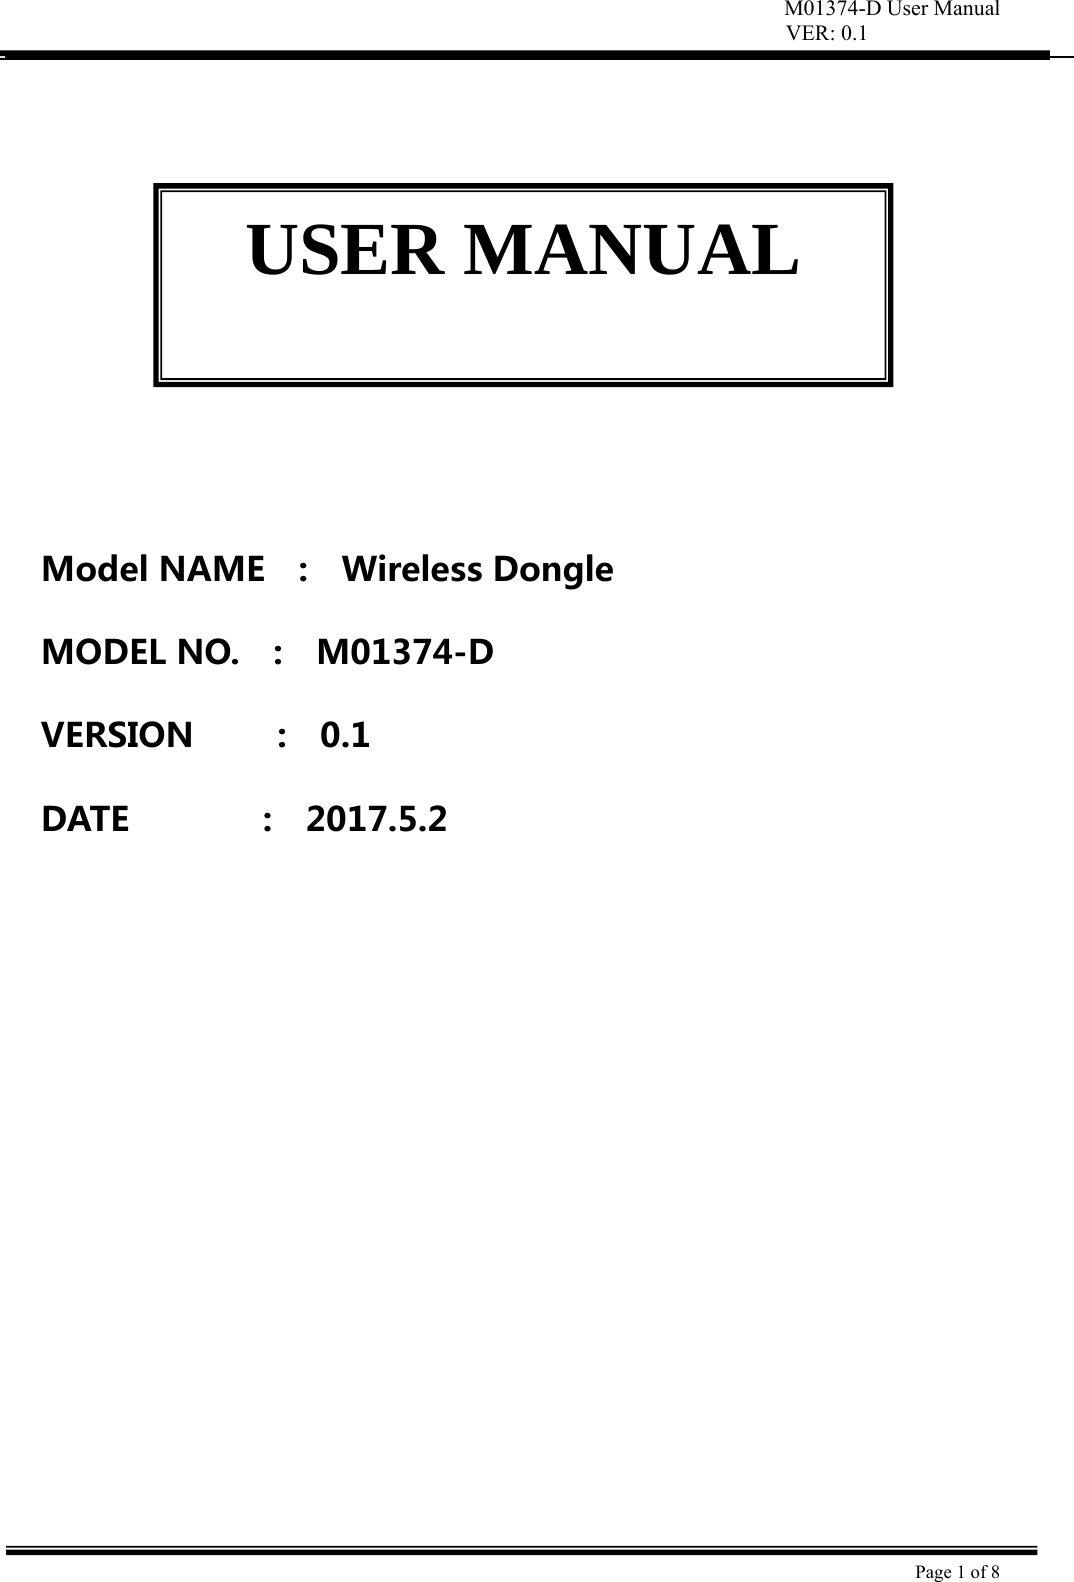 M01374-D User Manual VER: 0.1  Page 1 of 8             ModelNAME  :  WirelessDongleMODELNO.:M01374-DVERSION:0.1DATE:2017.5.2USER MANUAL 